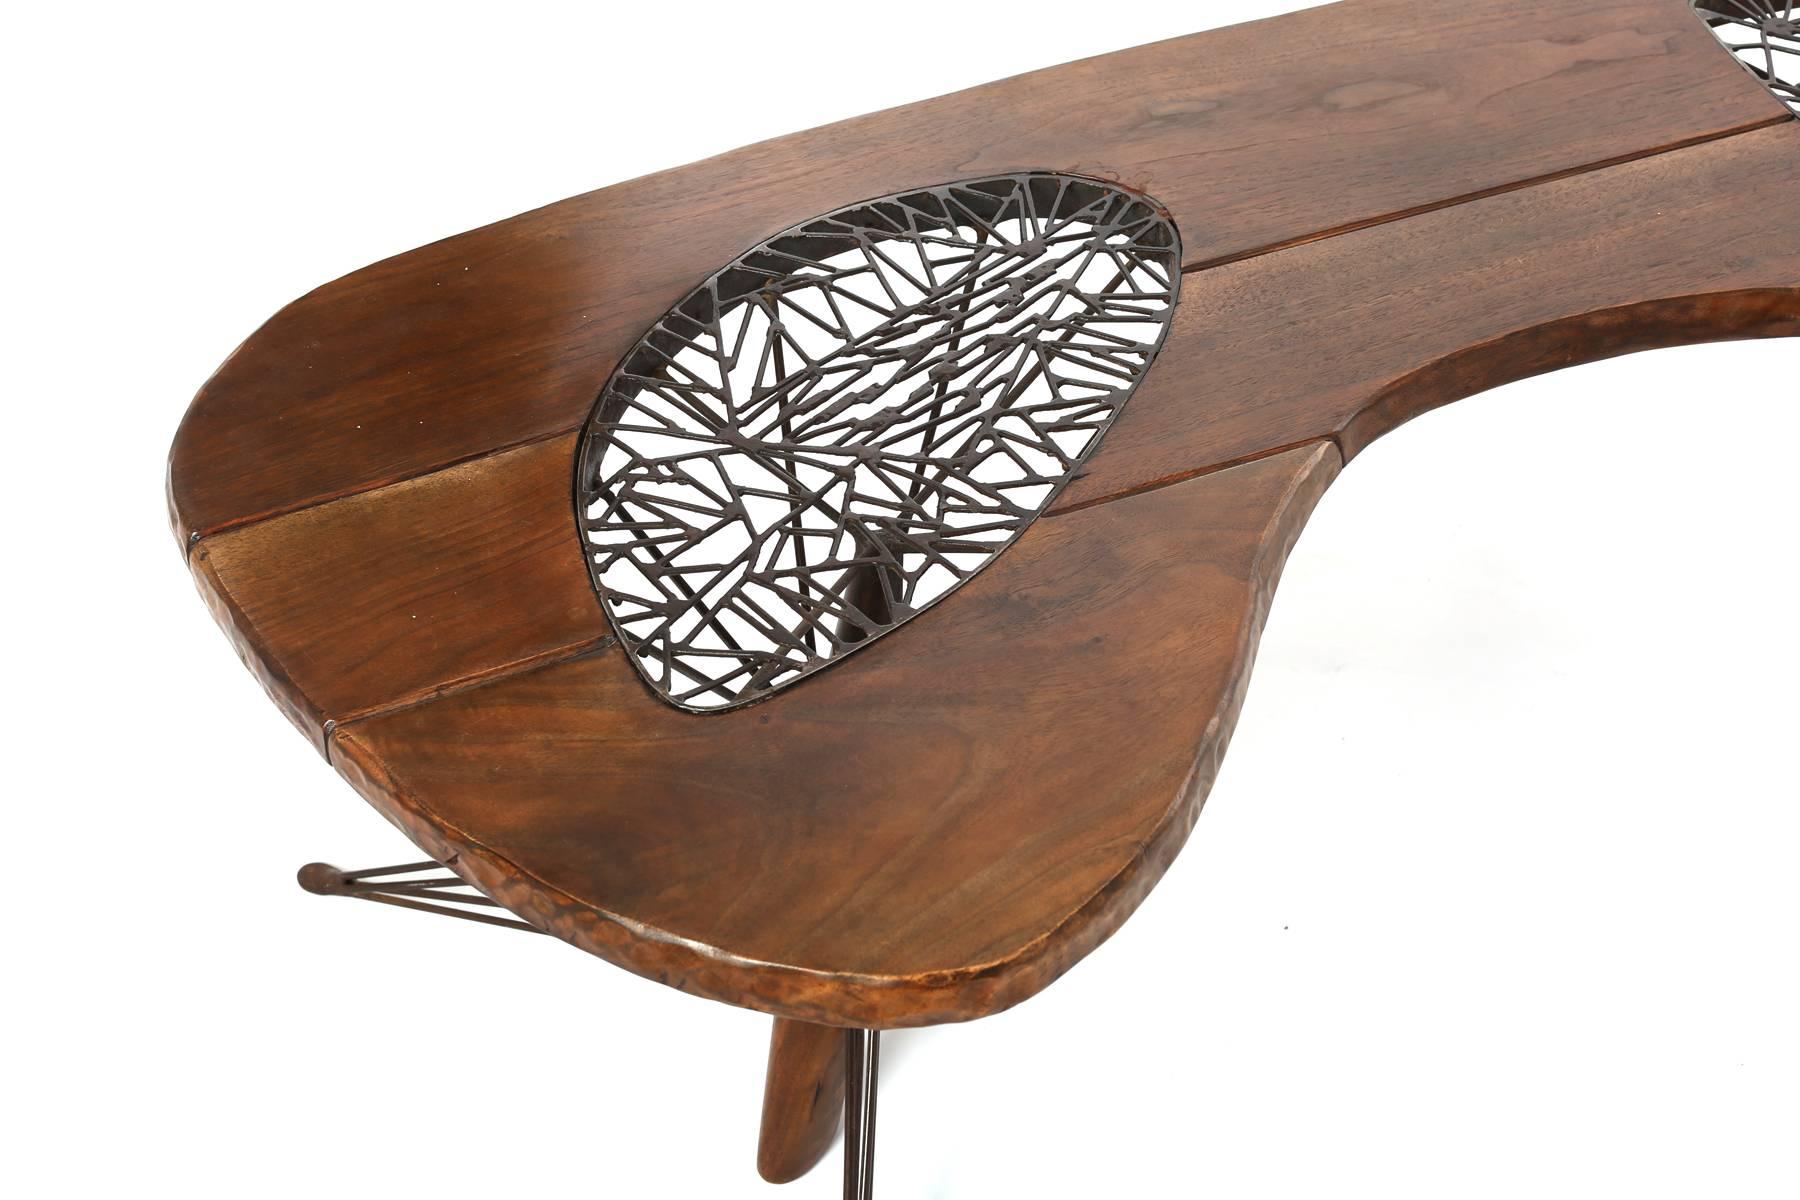 One off cocktail table by Allen Ditson, circa mid-1950s. This extraordinary example seamlessly mess solid walnut with patinated steel. Please see our other examples for other works by Ditson.